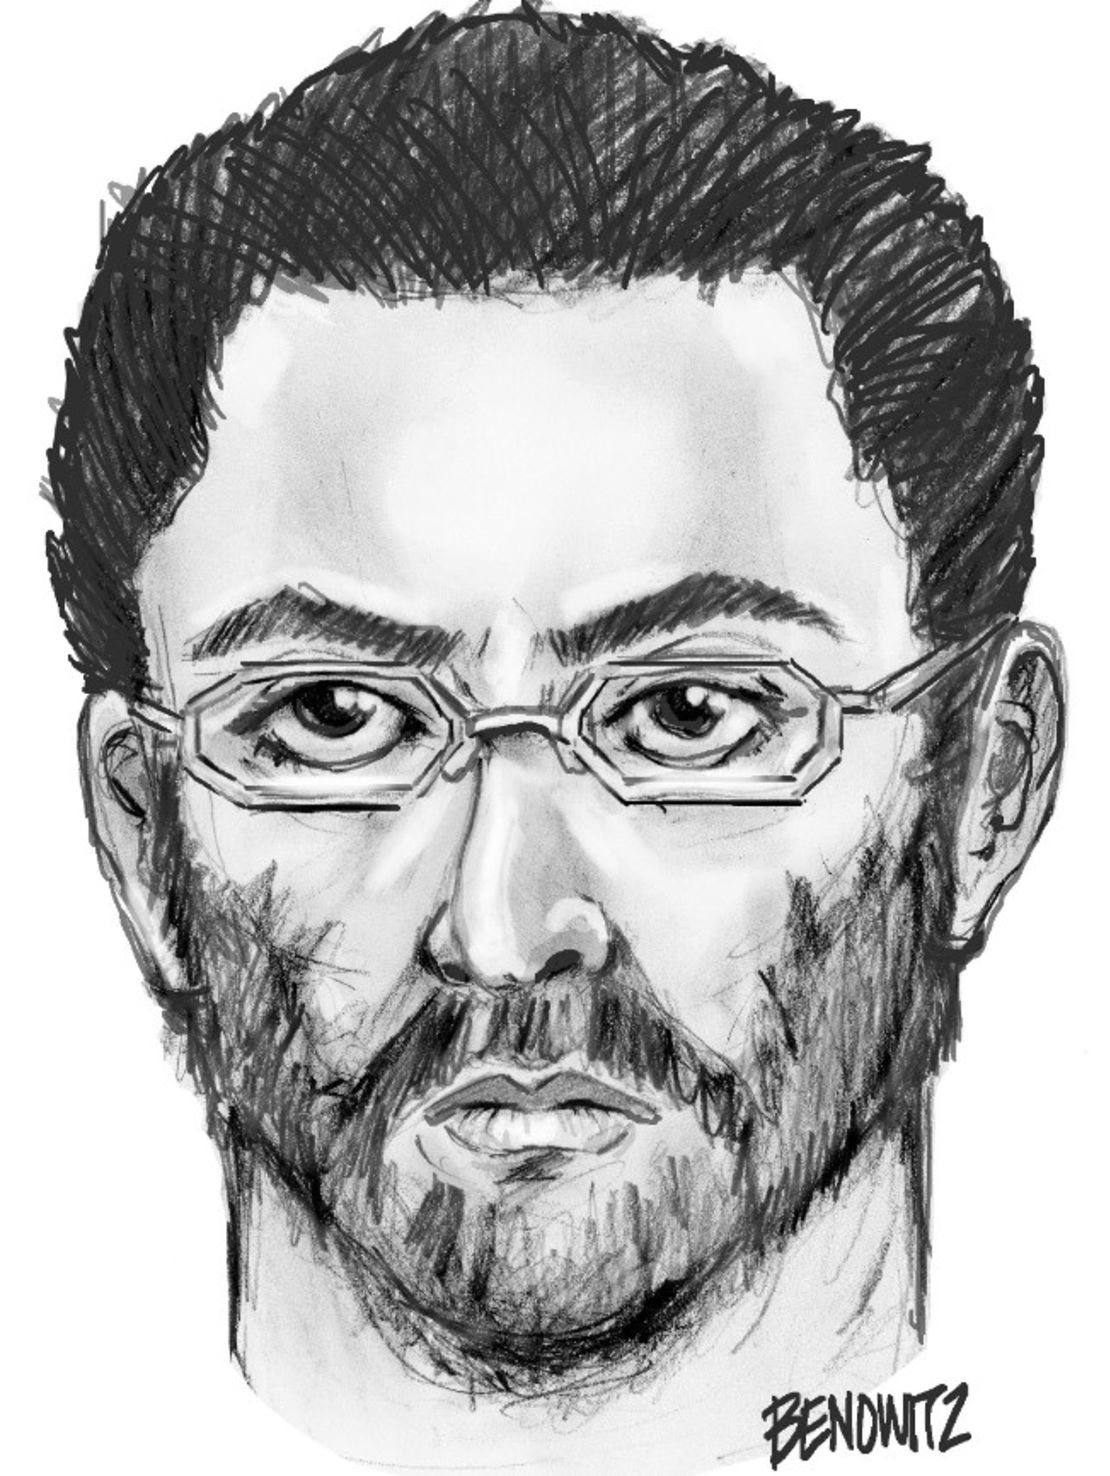 Sketch of suspect wanted in killing of Imam Maulama Akonjee, 55.